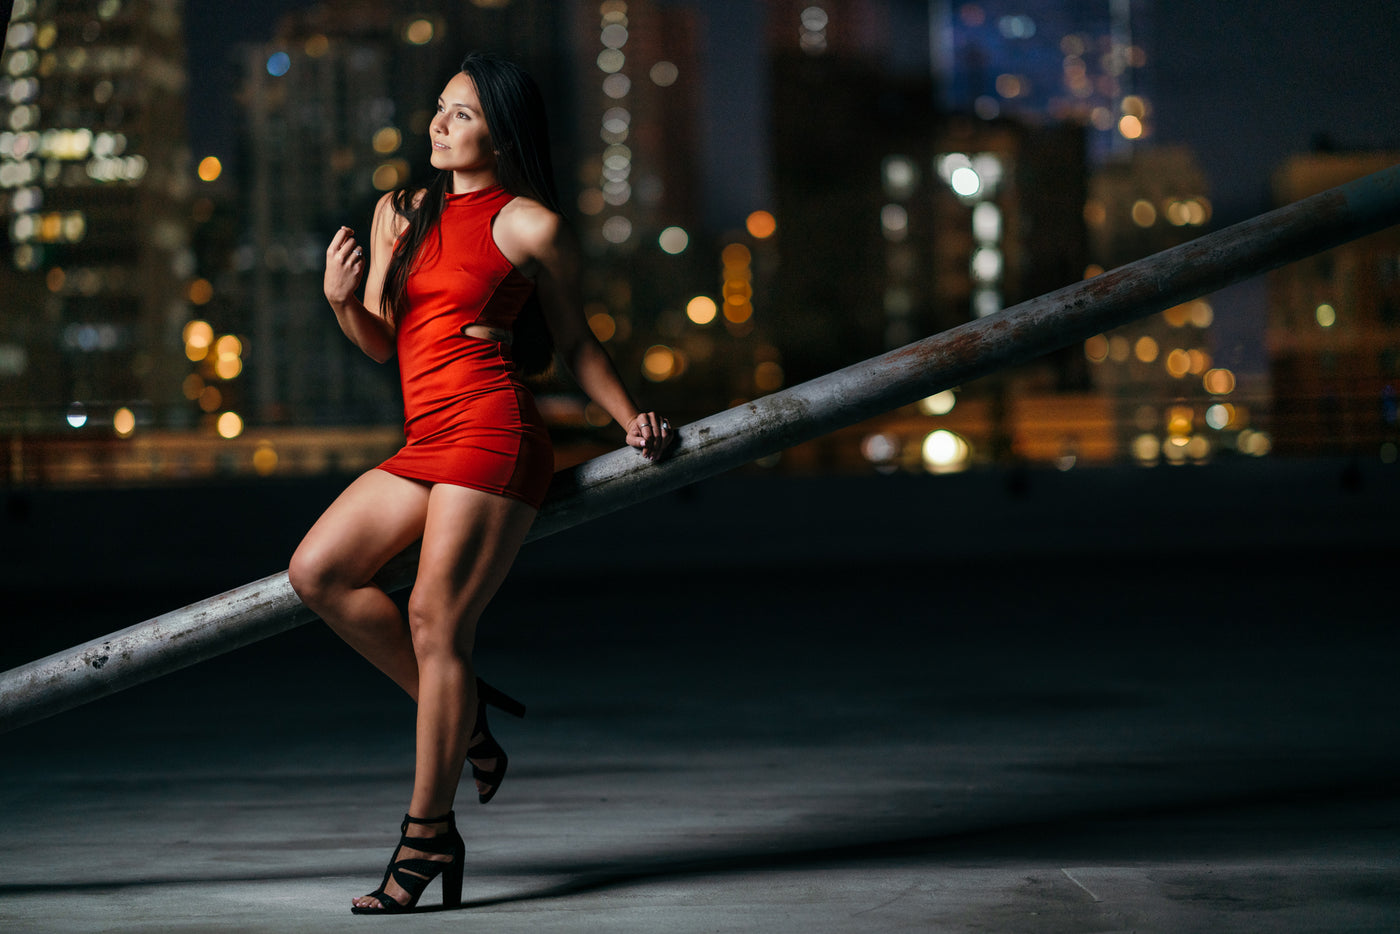 LA Rooftop Photoshoot using Continuous Lights